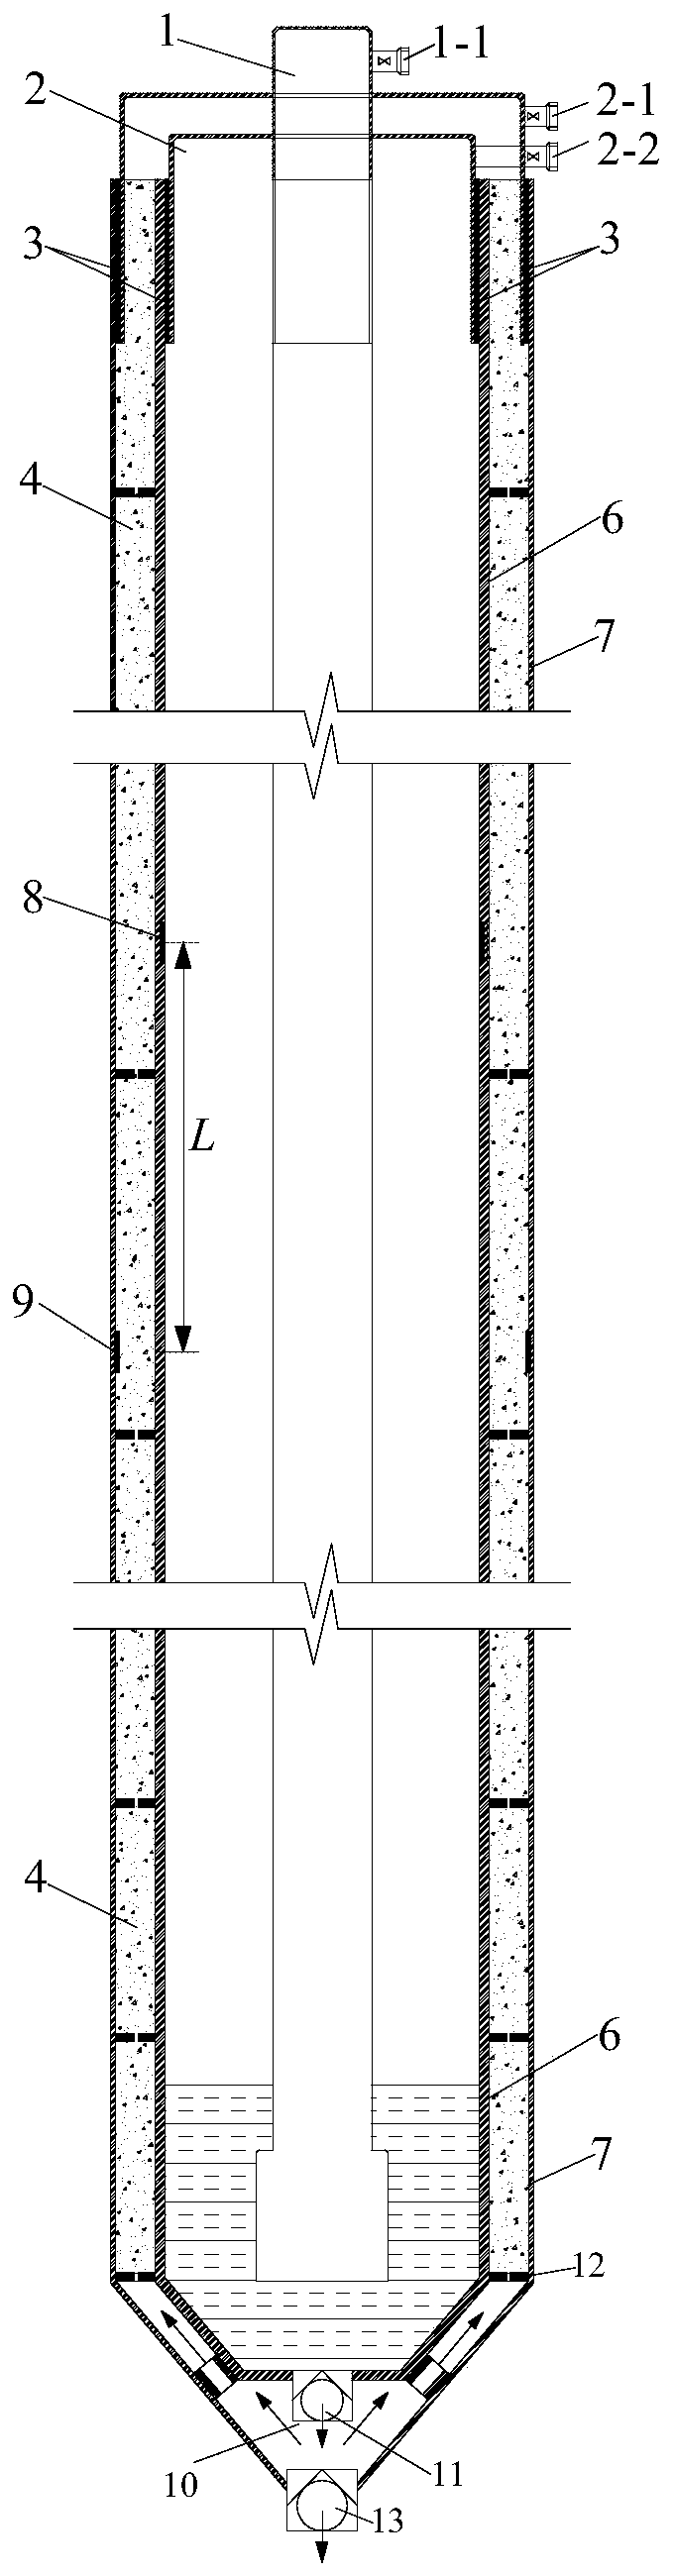 Fiber mesh reinforced grouting full-length reinforced frozen pipe in double-layer sandwich cavity and construction method